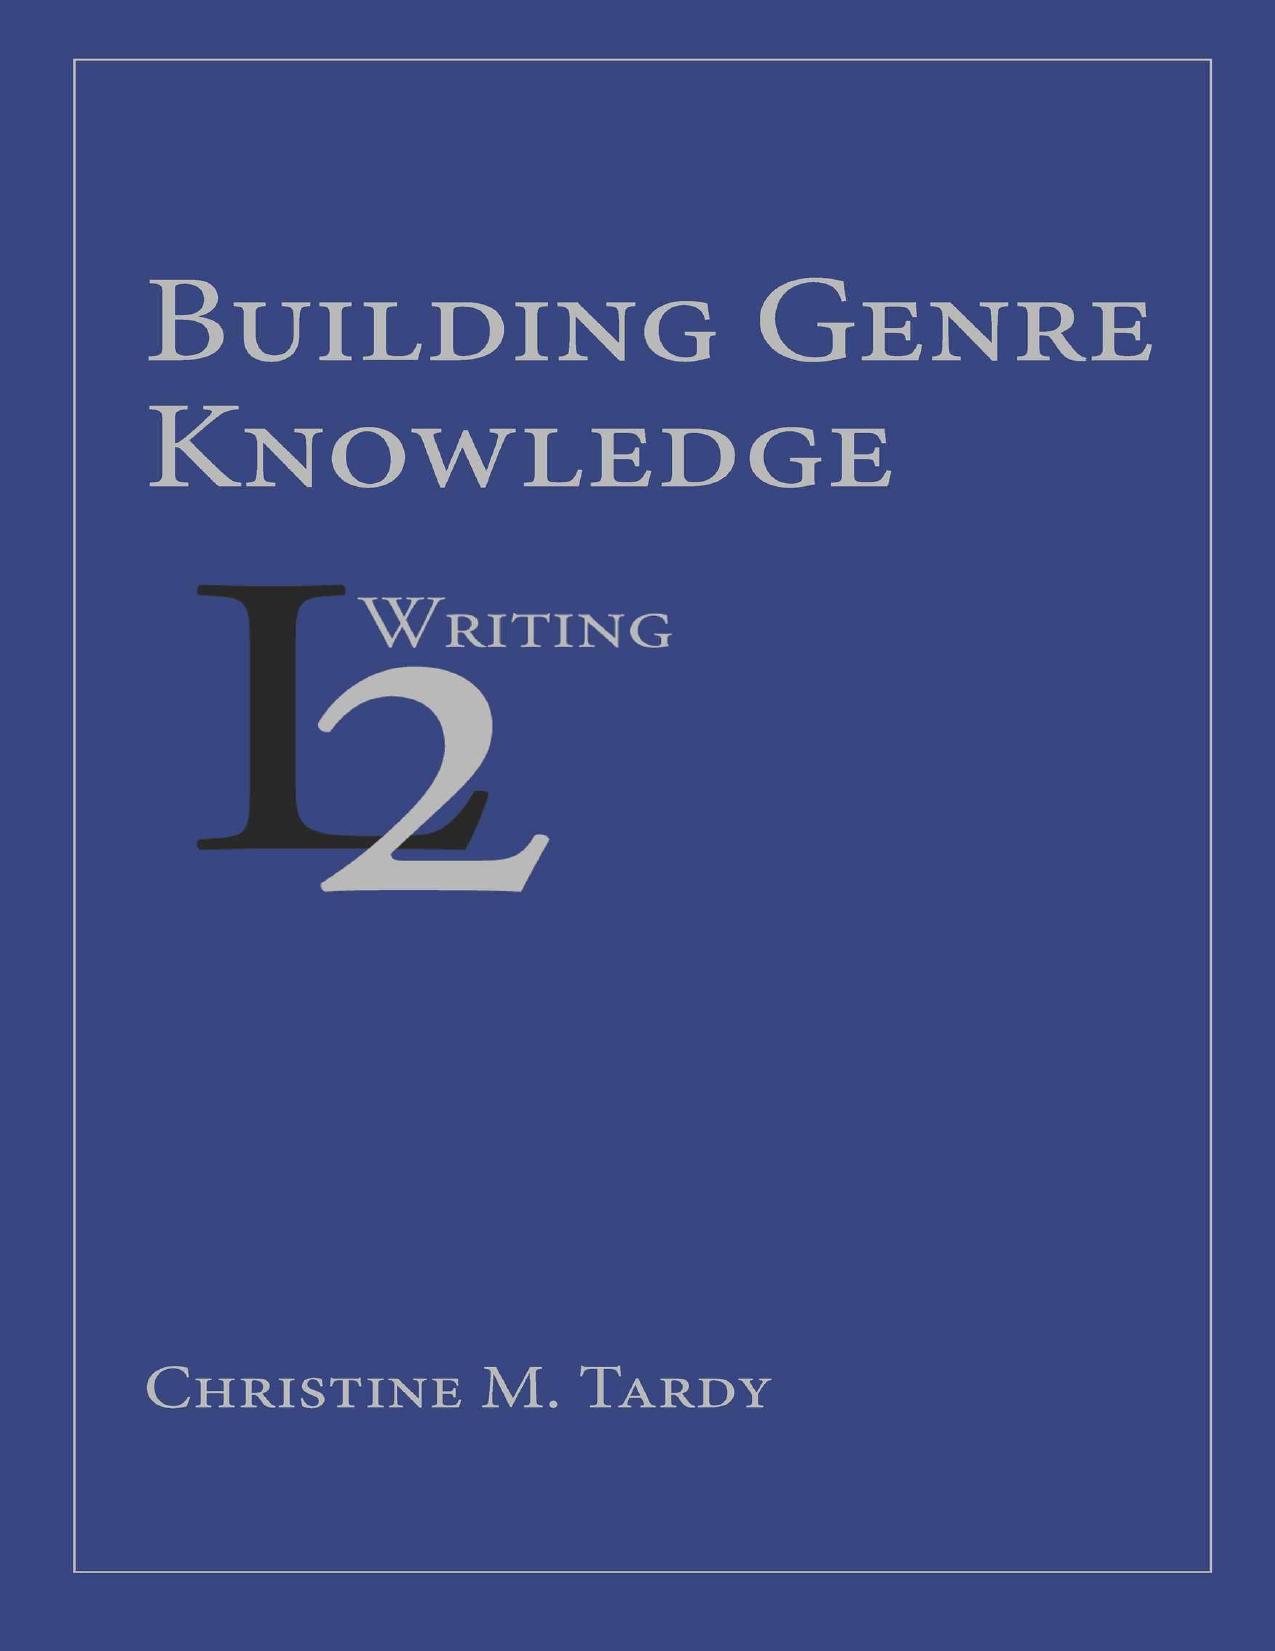 Building Genre Knowledge (Second Language Writing) by Christine Tardy